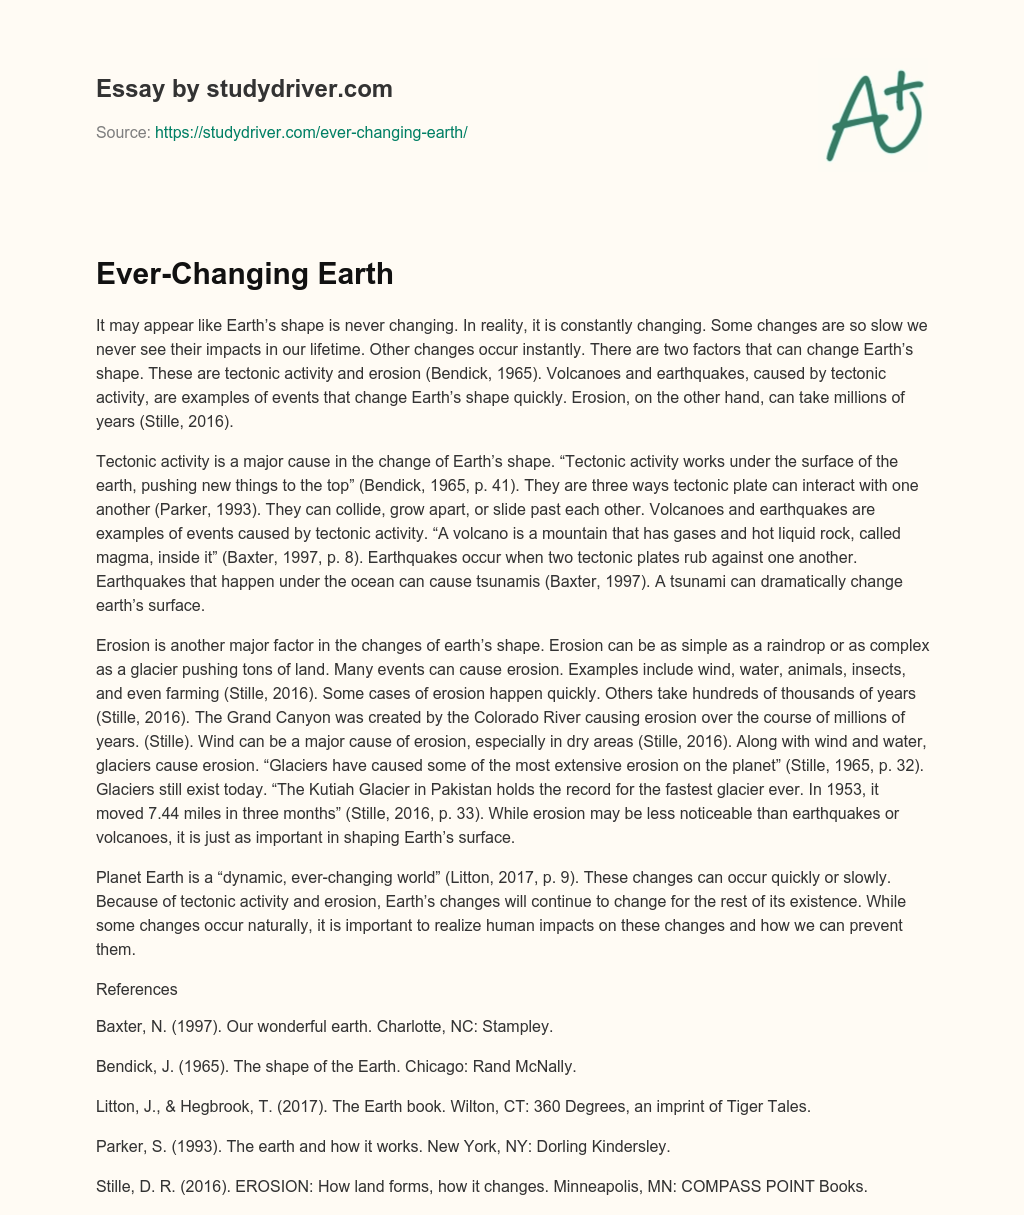 Ever-Changing Earth essay